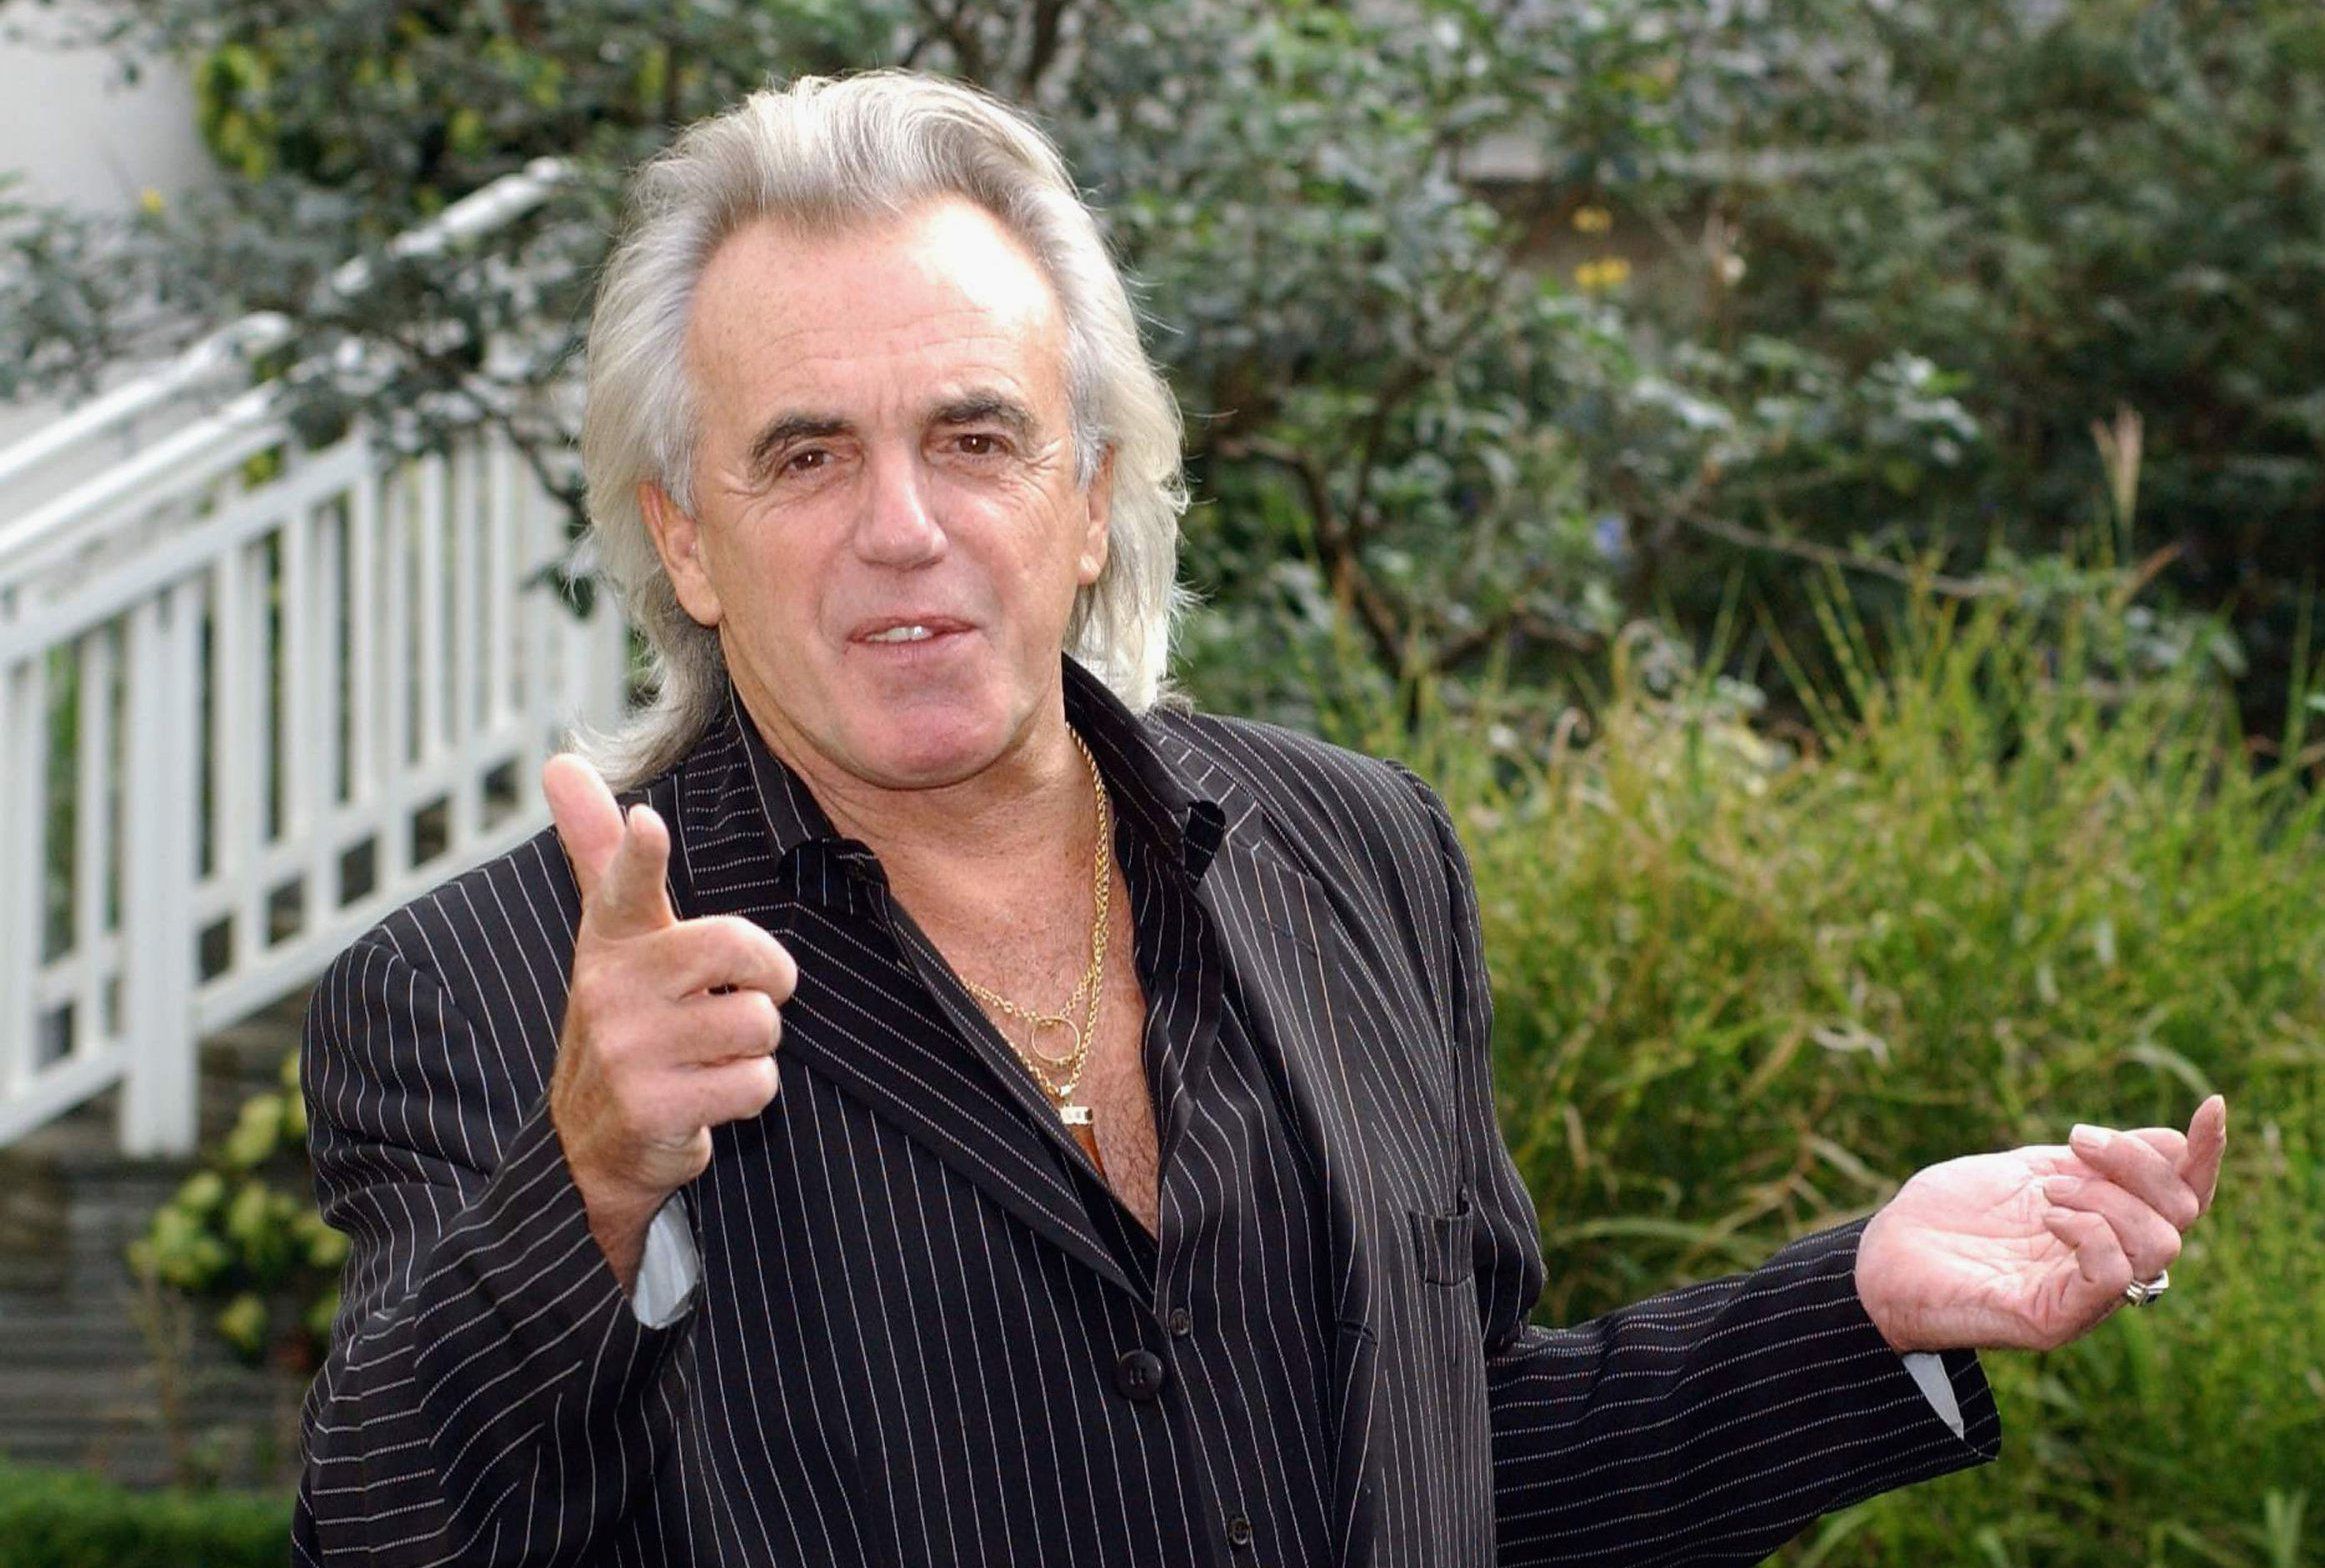 DUBLIN, IRELAND - SEPTEMBER 5: Peter Stringfellow poses as he announces the opening of his first club in Ireland which will be located in the Parnell Centre, September 5 2005 in Dublin, Ireland. (Photo by ShowBizIreland/Getty Images)